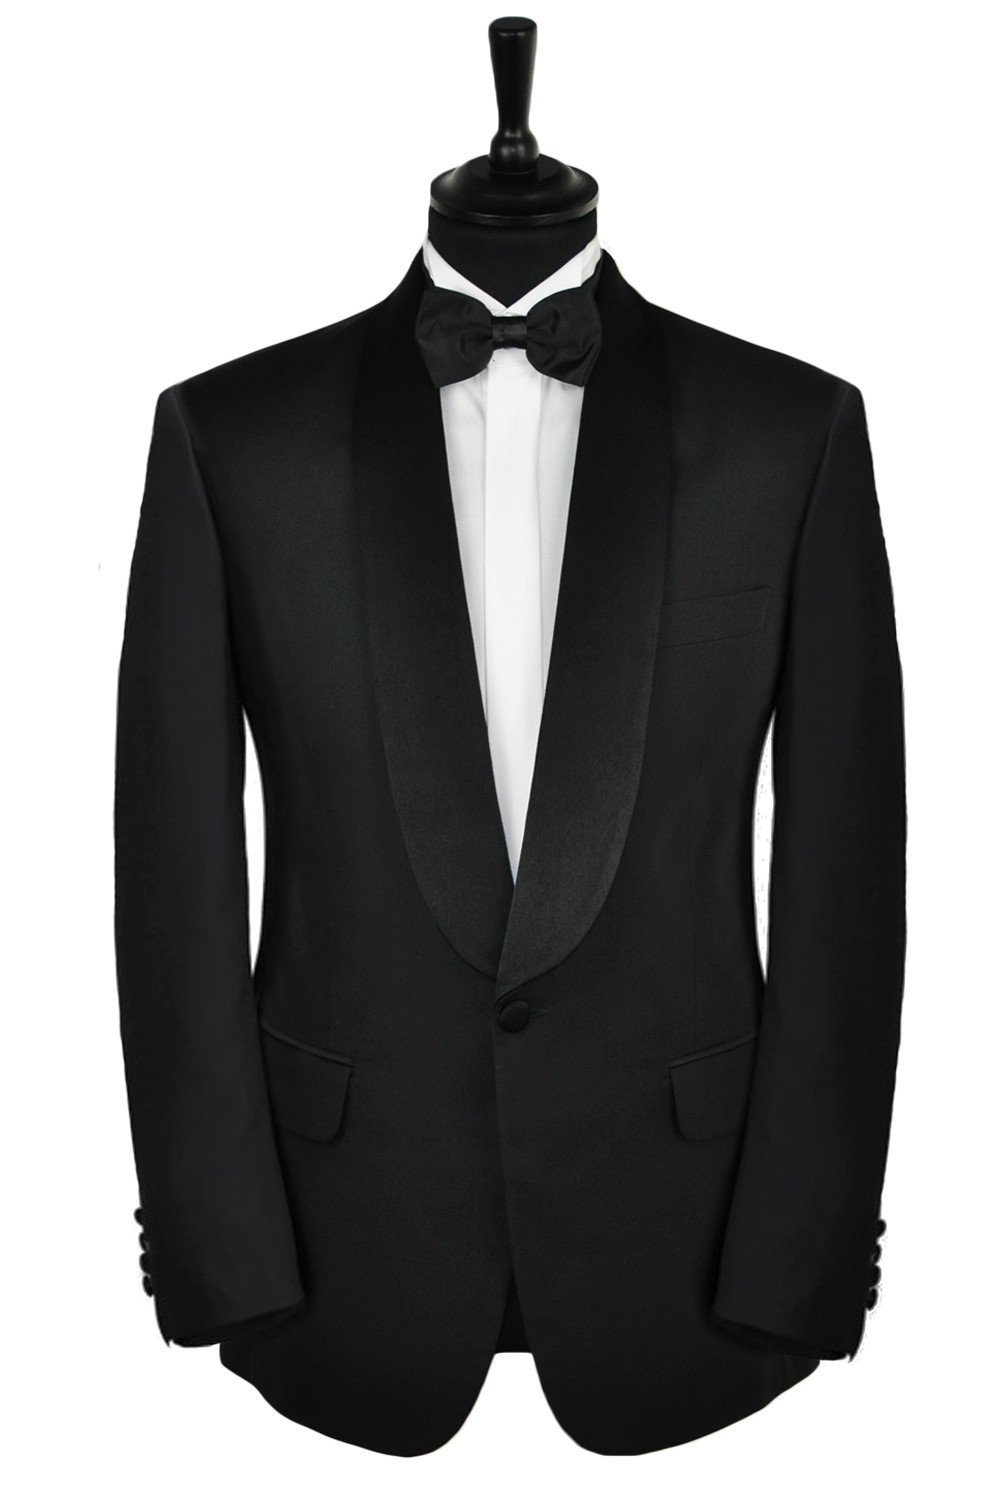 How to wear a Tuxedo. | lifestyle